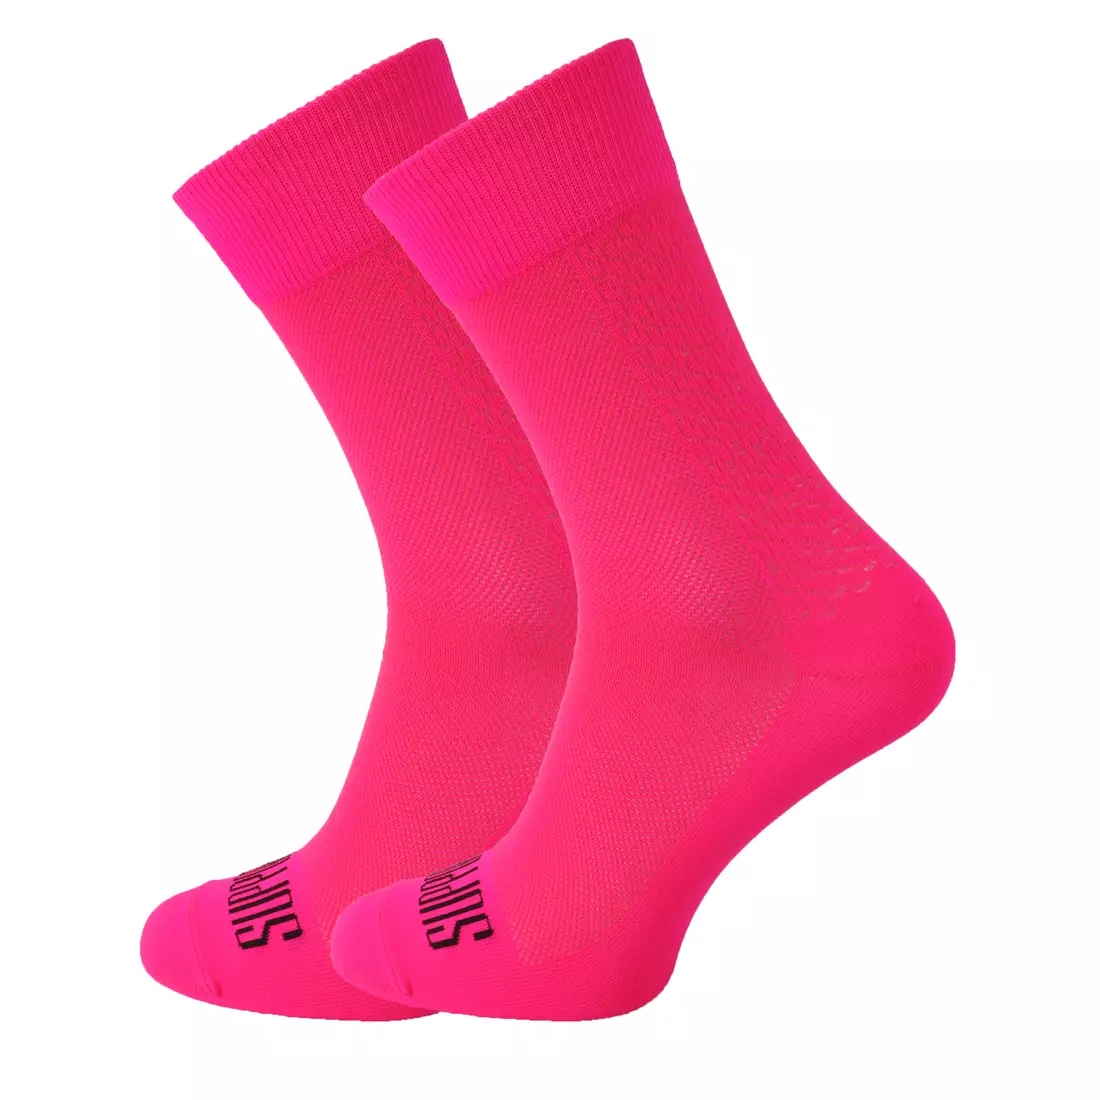 SUPPORTSPORT cycling socks S-LIGHT pink fluo